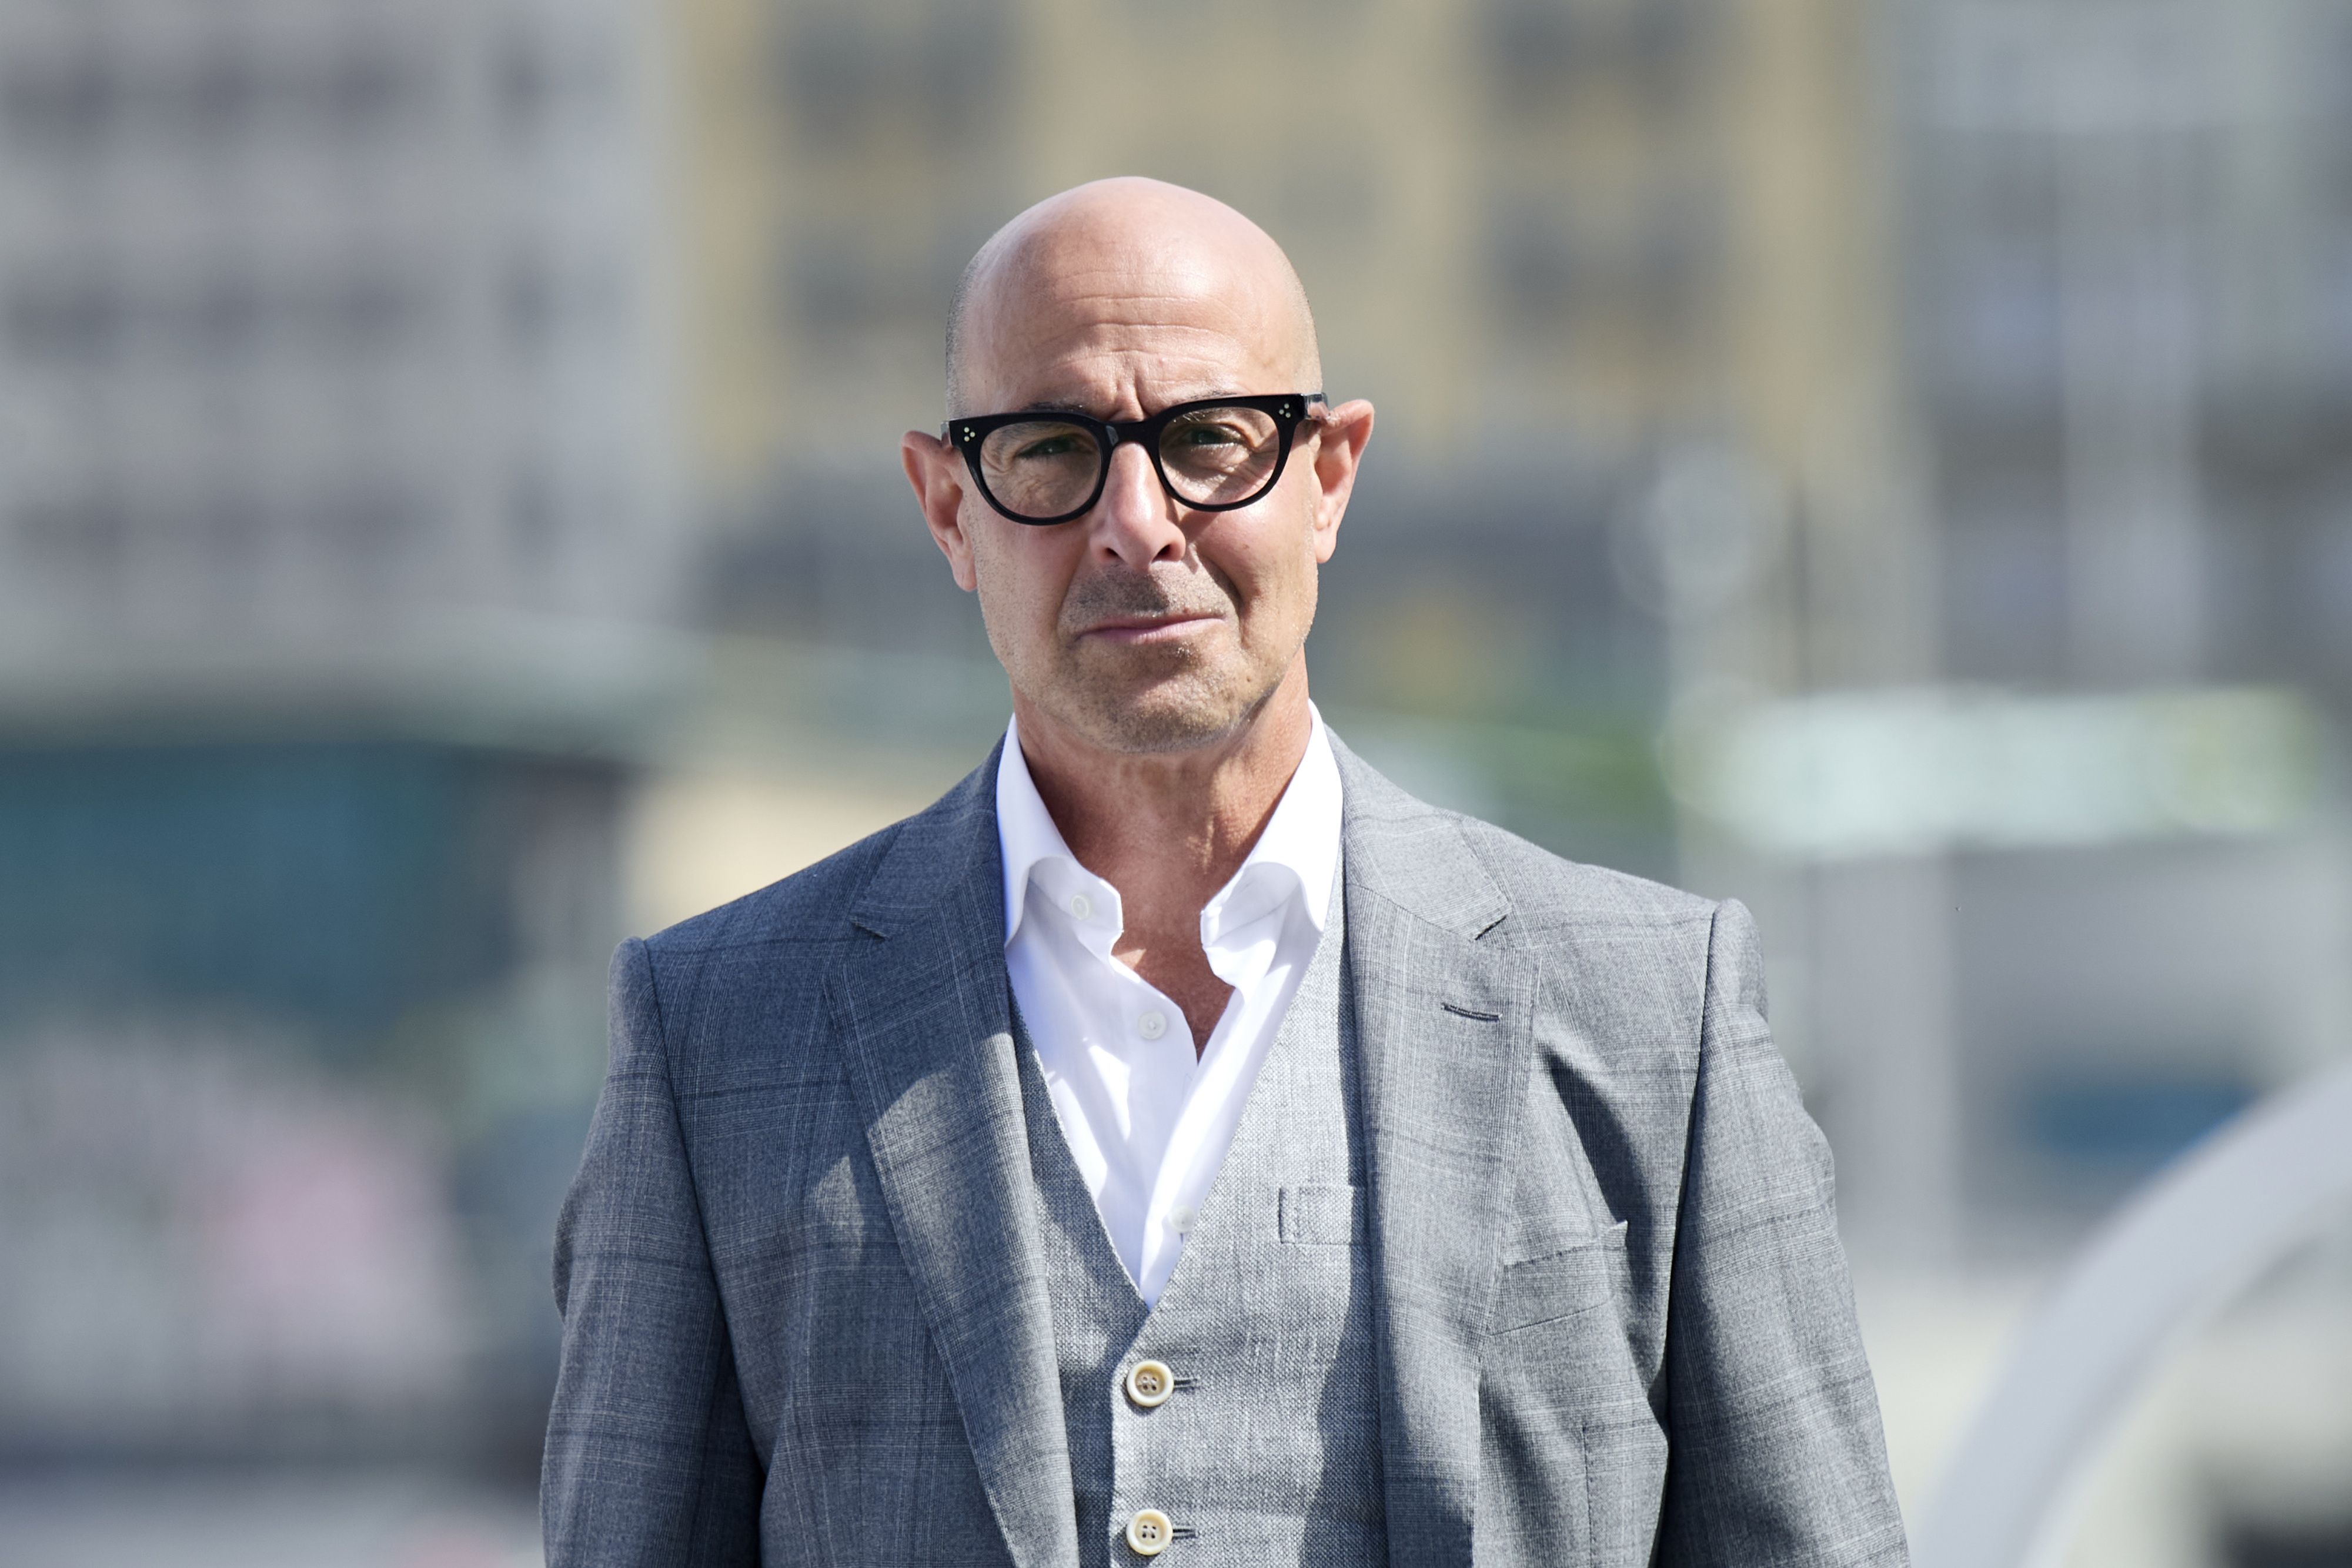 https://hips.hearstapps.com/hmg-prod/images/actor-stanley-tucci-attends-la-fortuna-photocall-during-news-photo-1695052227.jpg